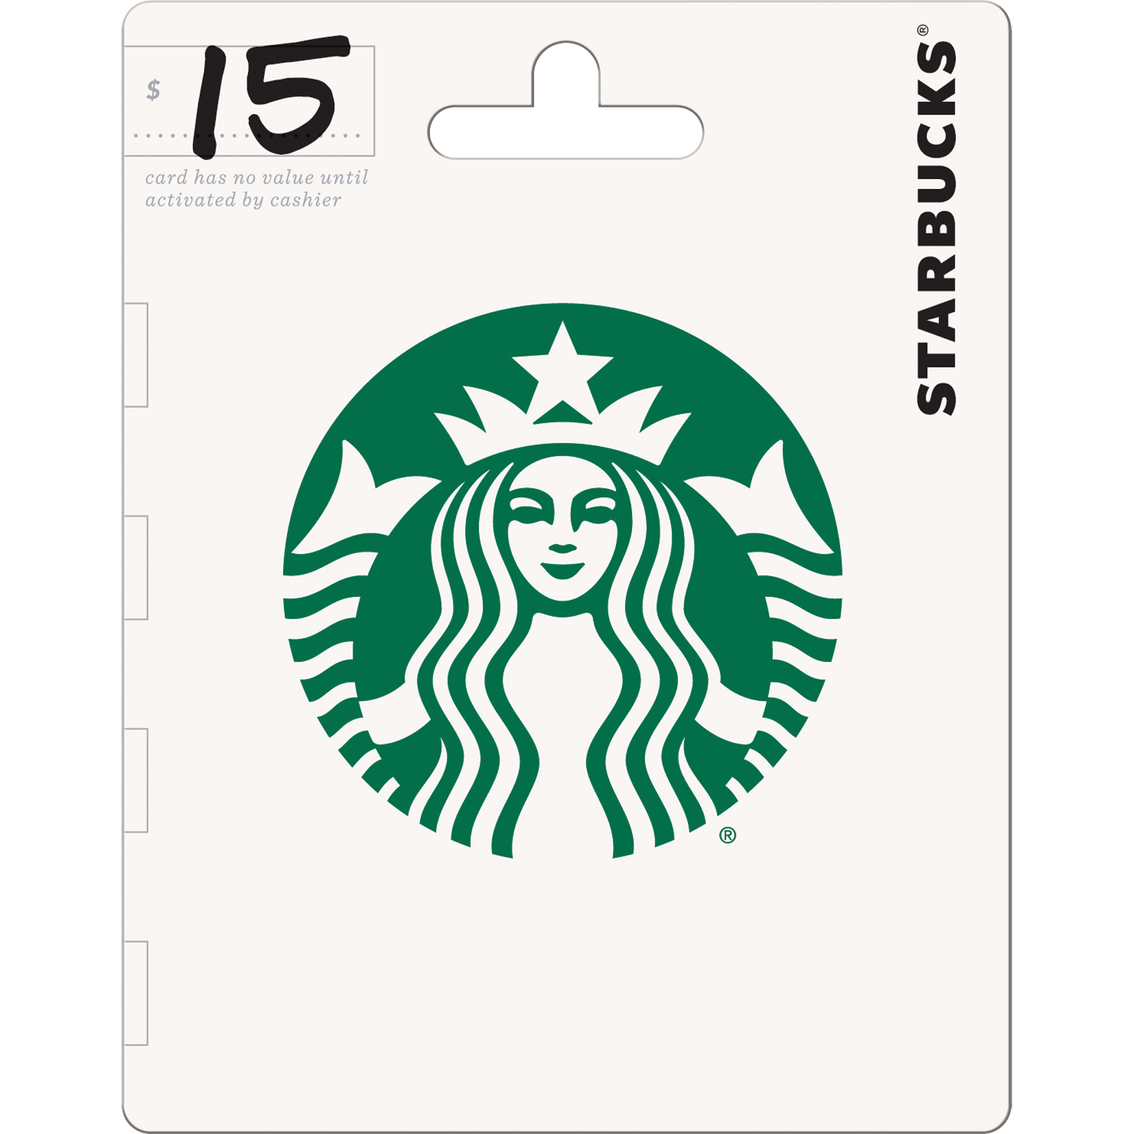 Starbucks Gift Card Entertainment Dining Food Gifts Shop The Exchange